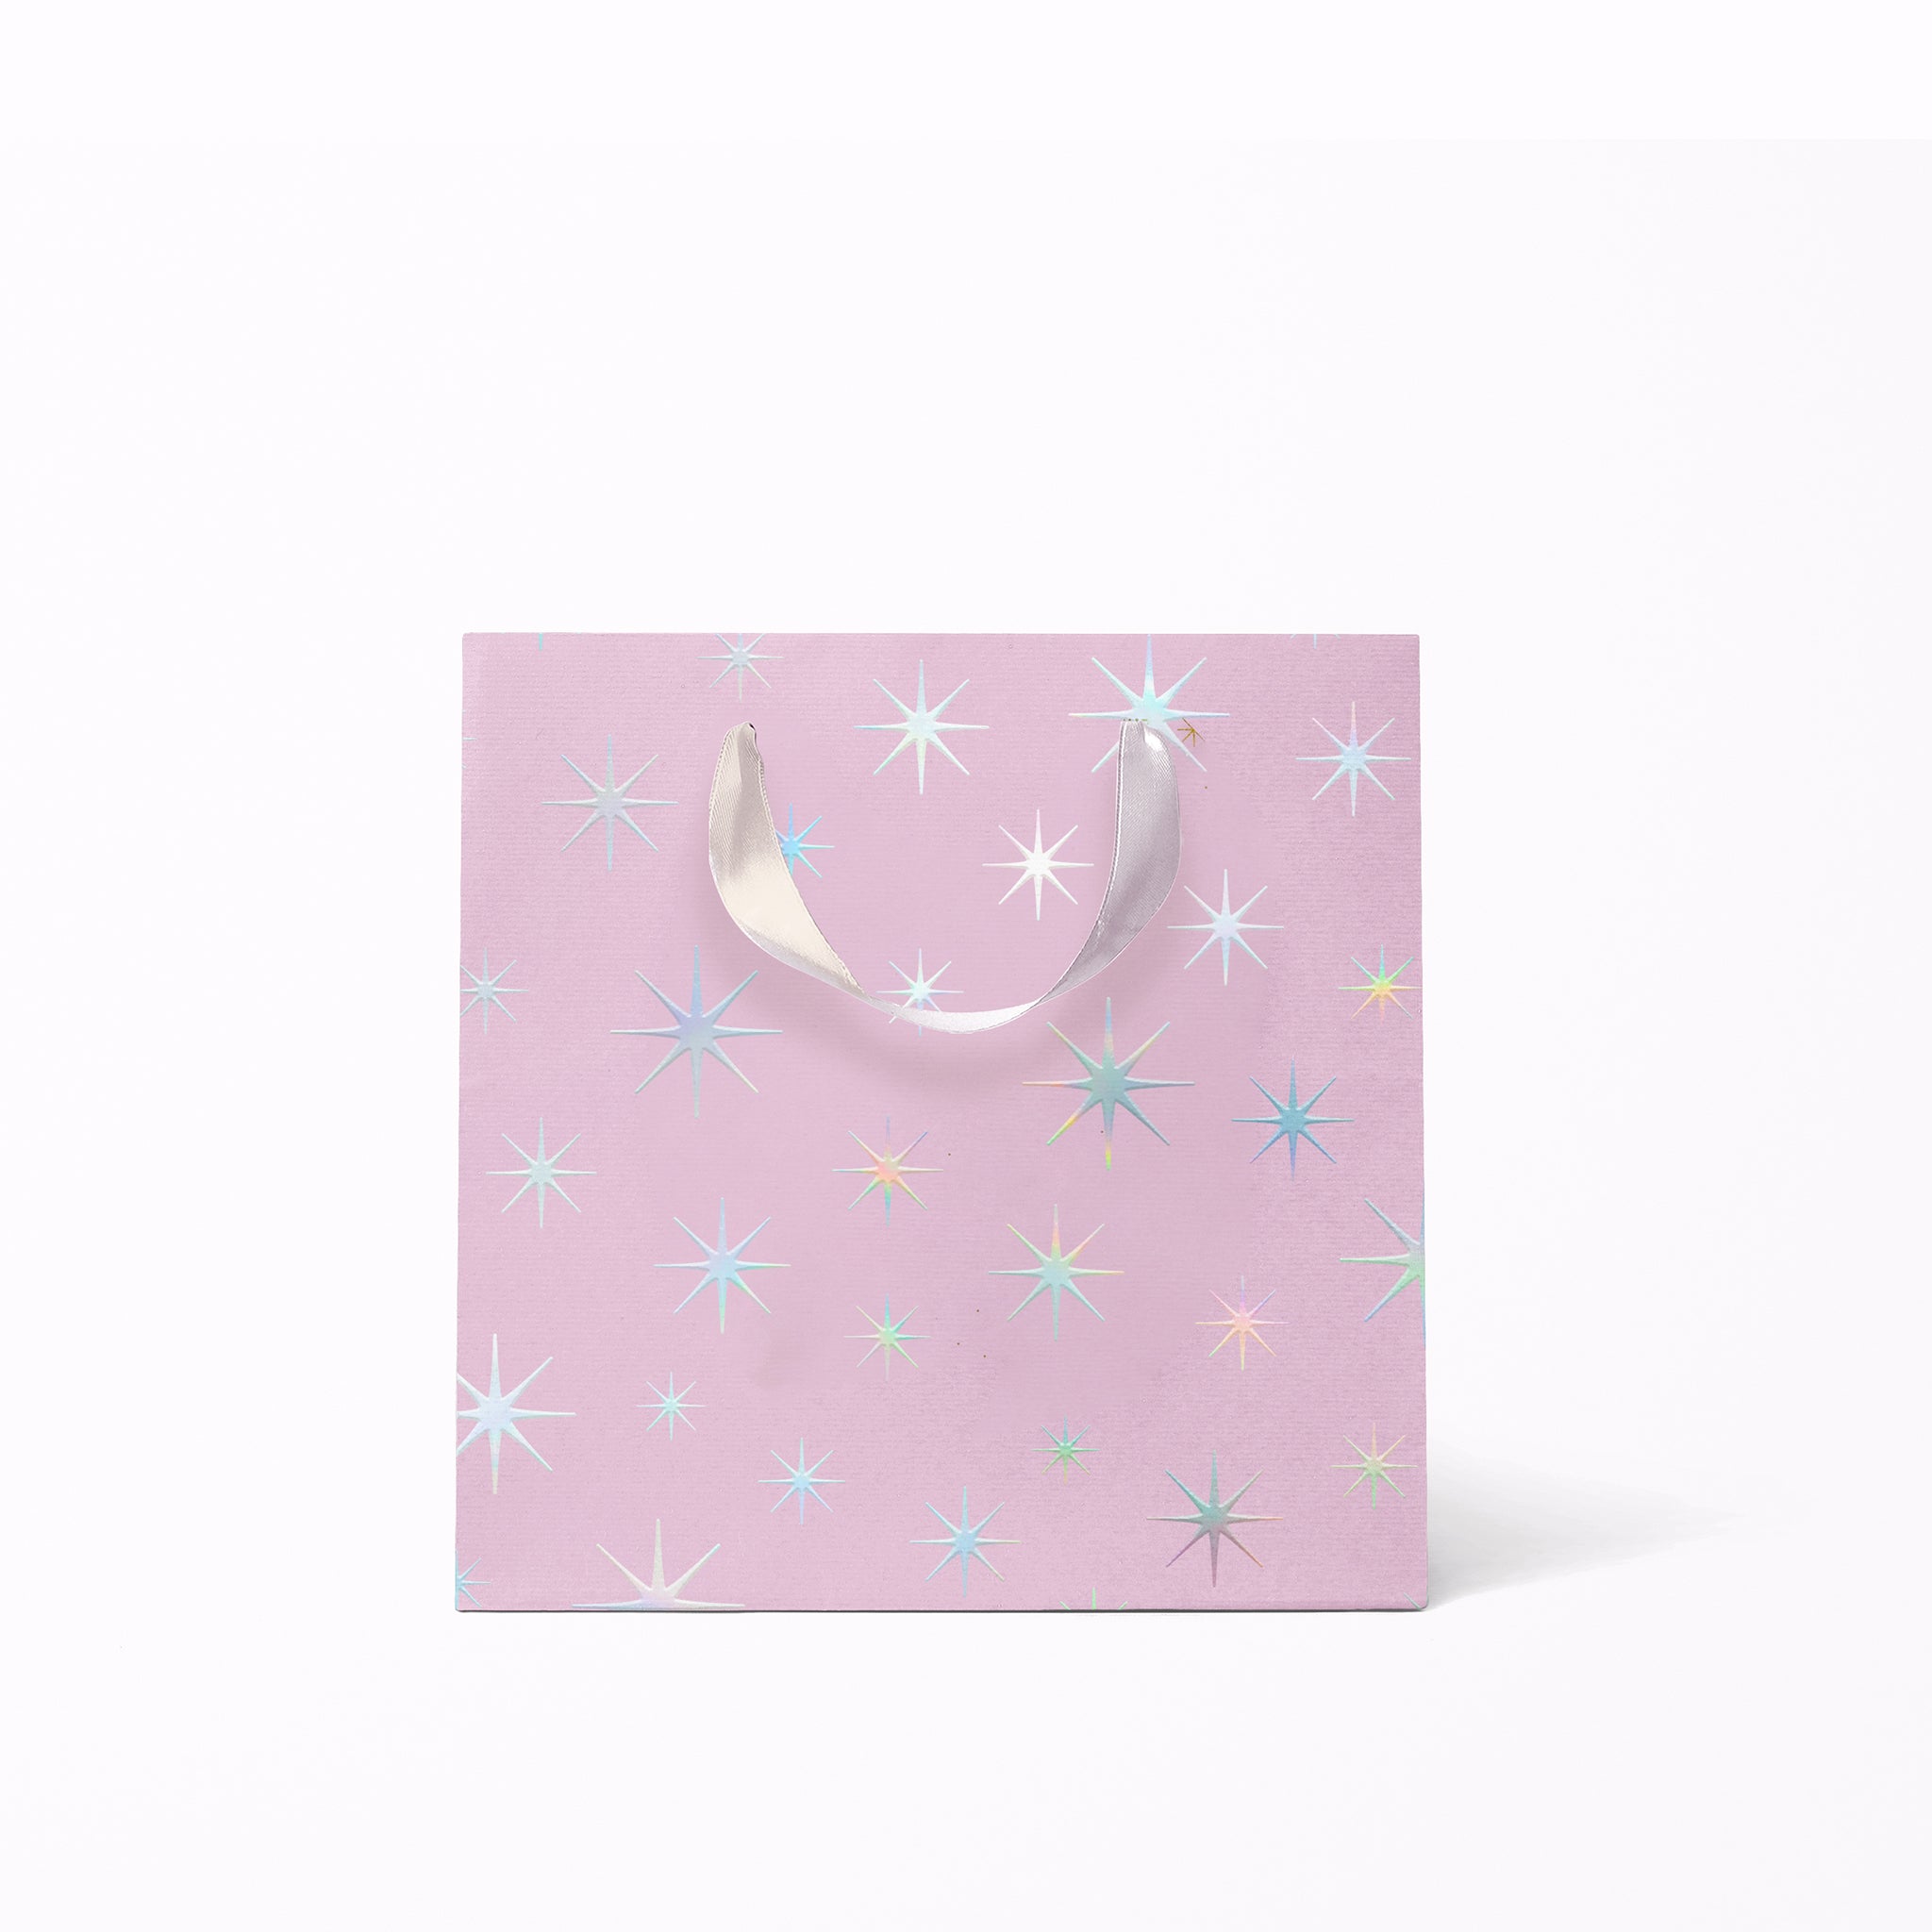 On a white background is a light purple gift bags with a silver star pattern and silver ribbon handles.